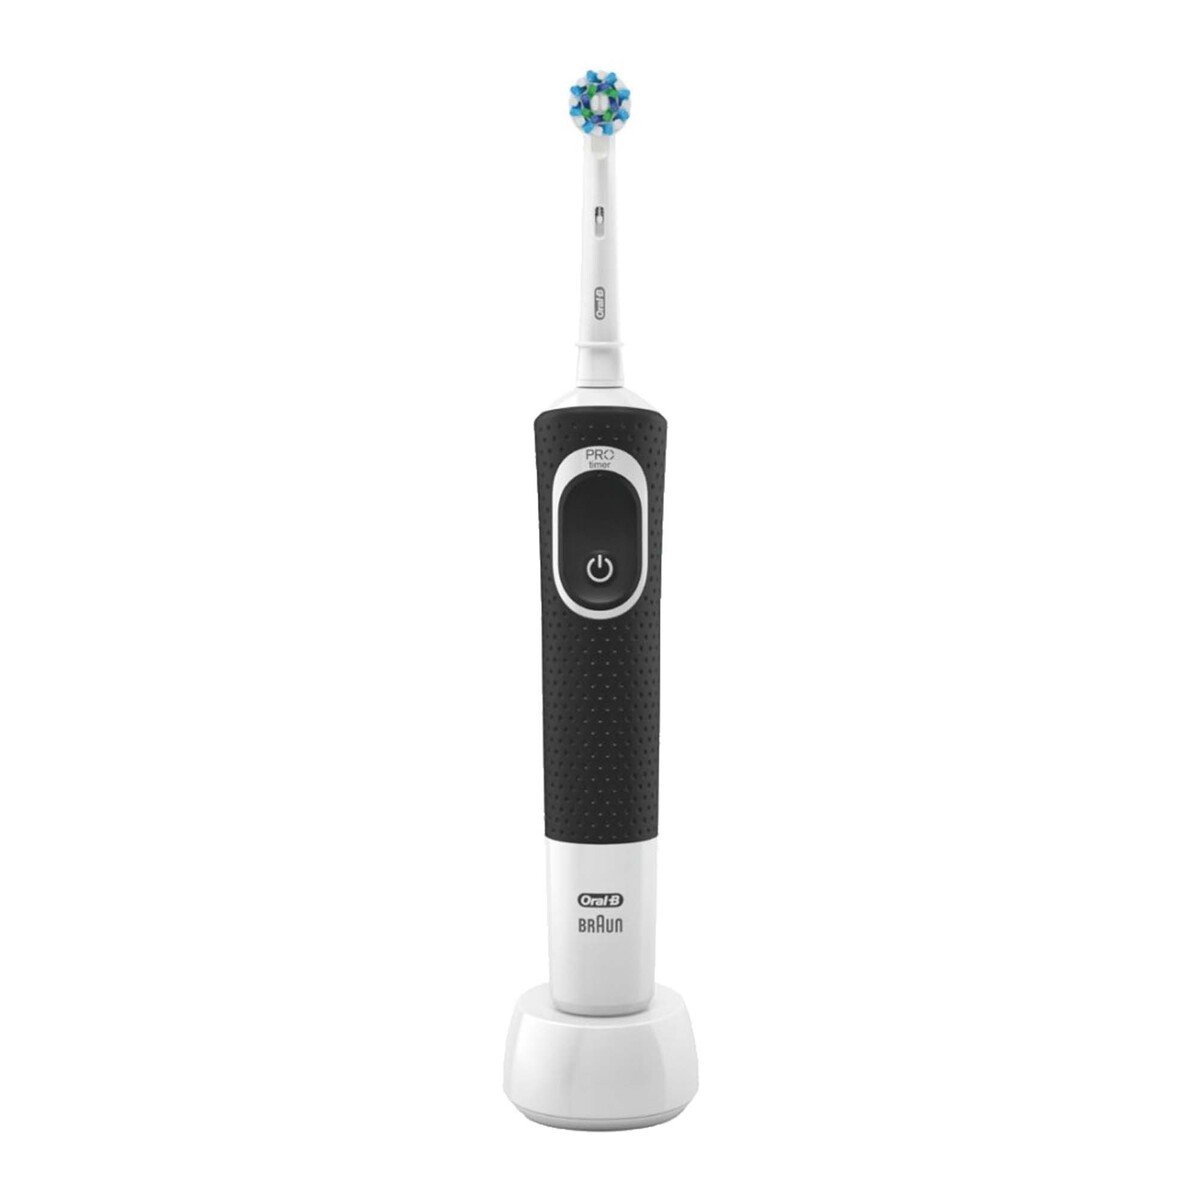 Oral-B Vitality Cross Action Rechargeable Electric Toothbrush D100.413.1 Black